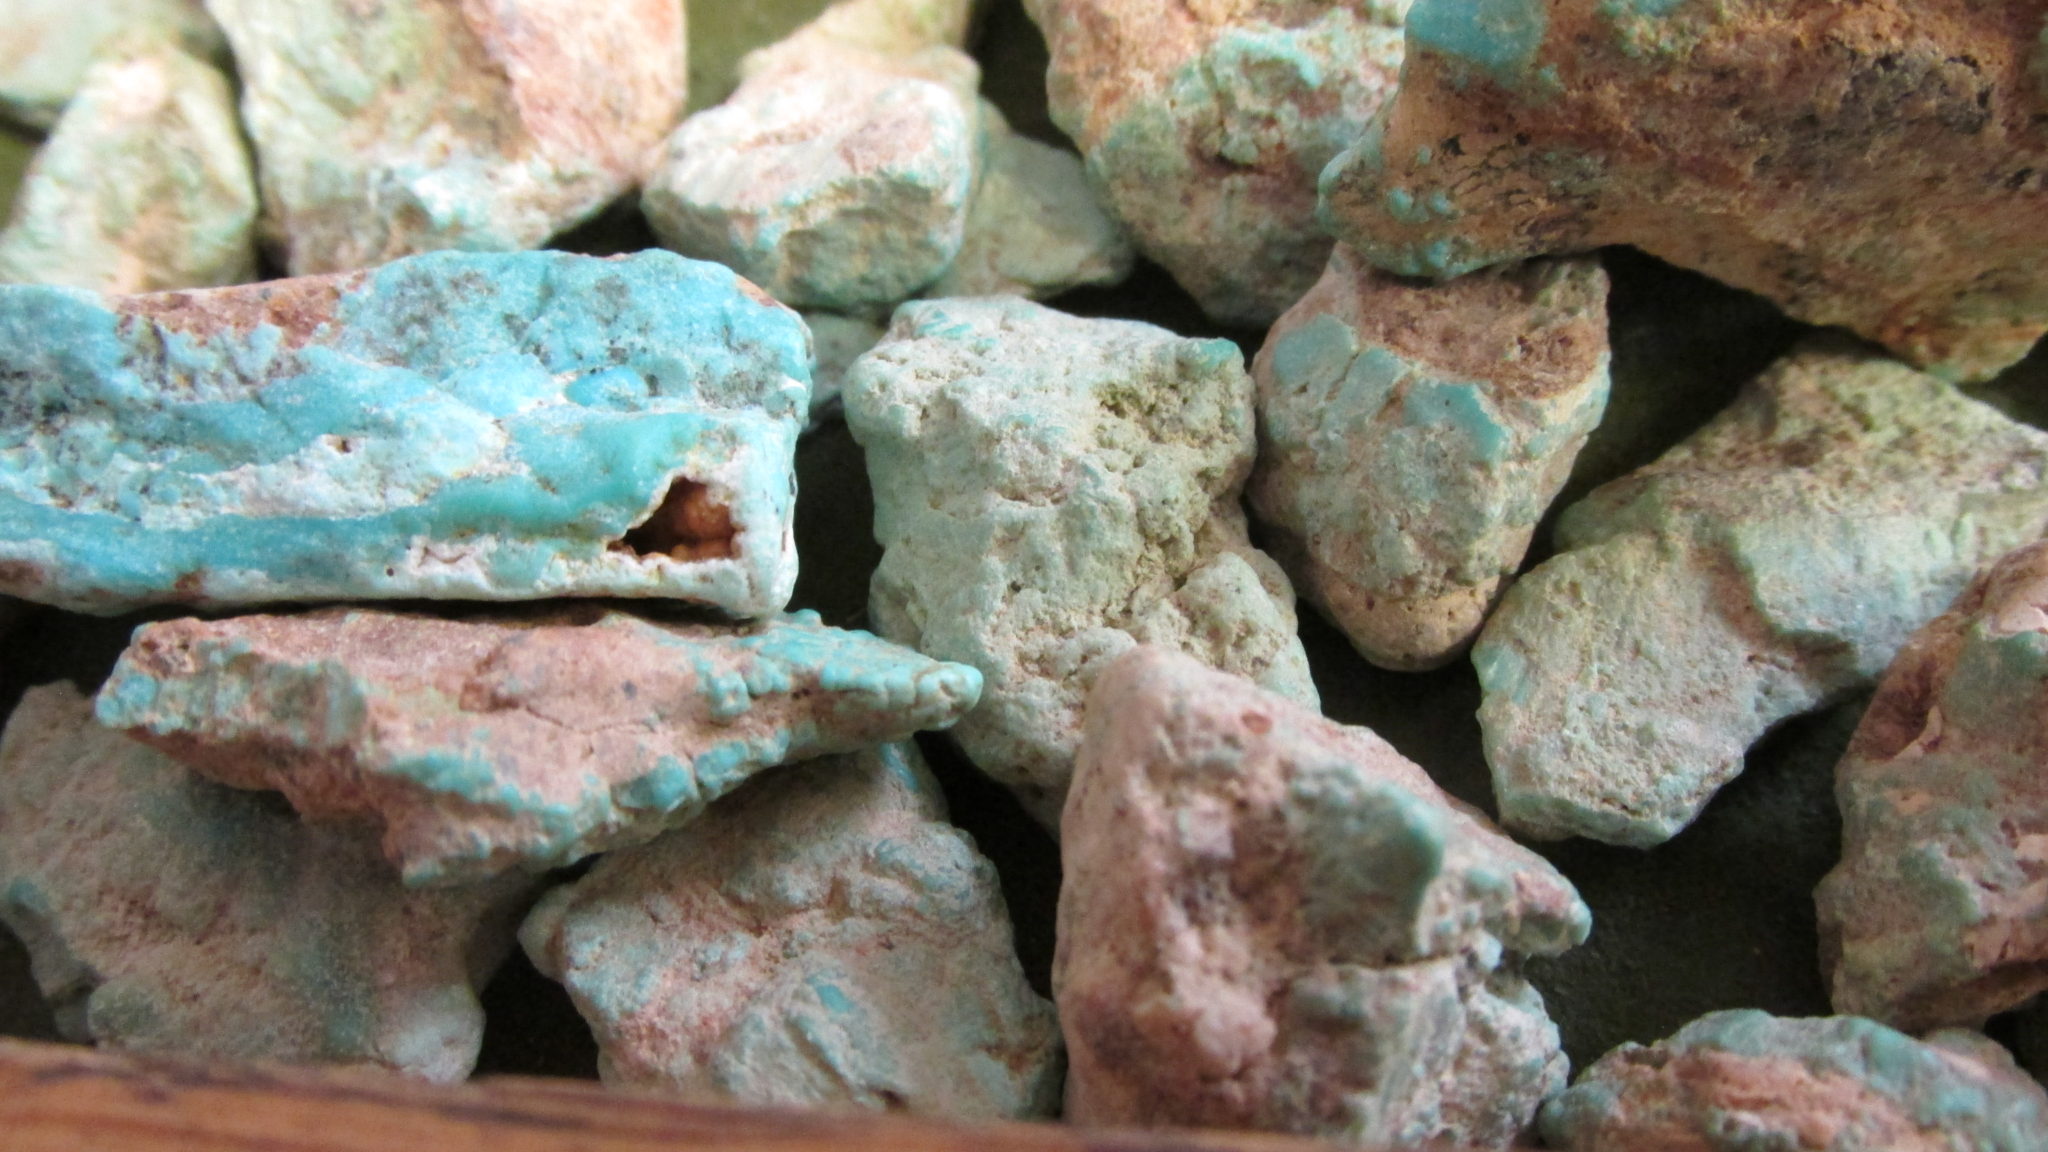 Cripple Creek Turquoise from Colorado